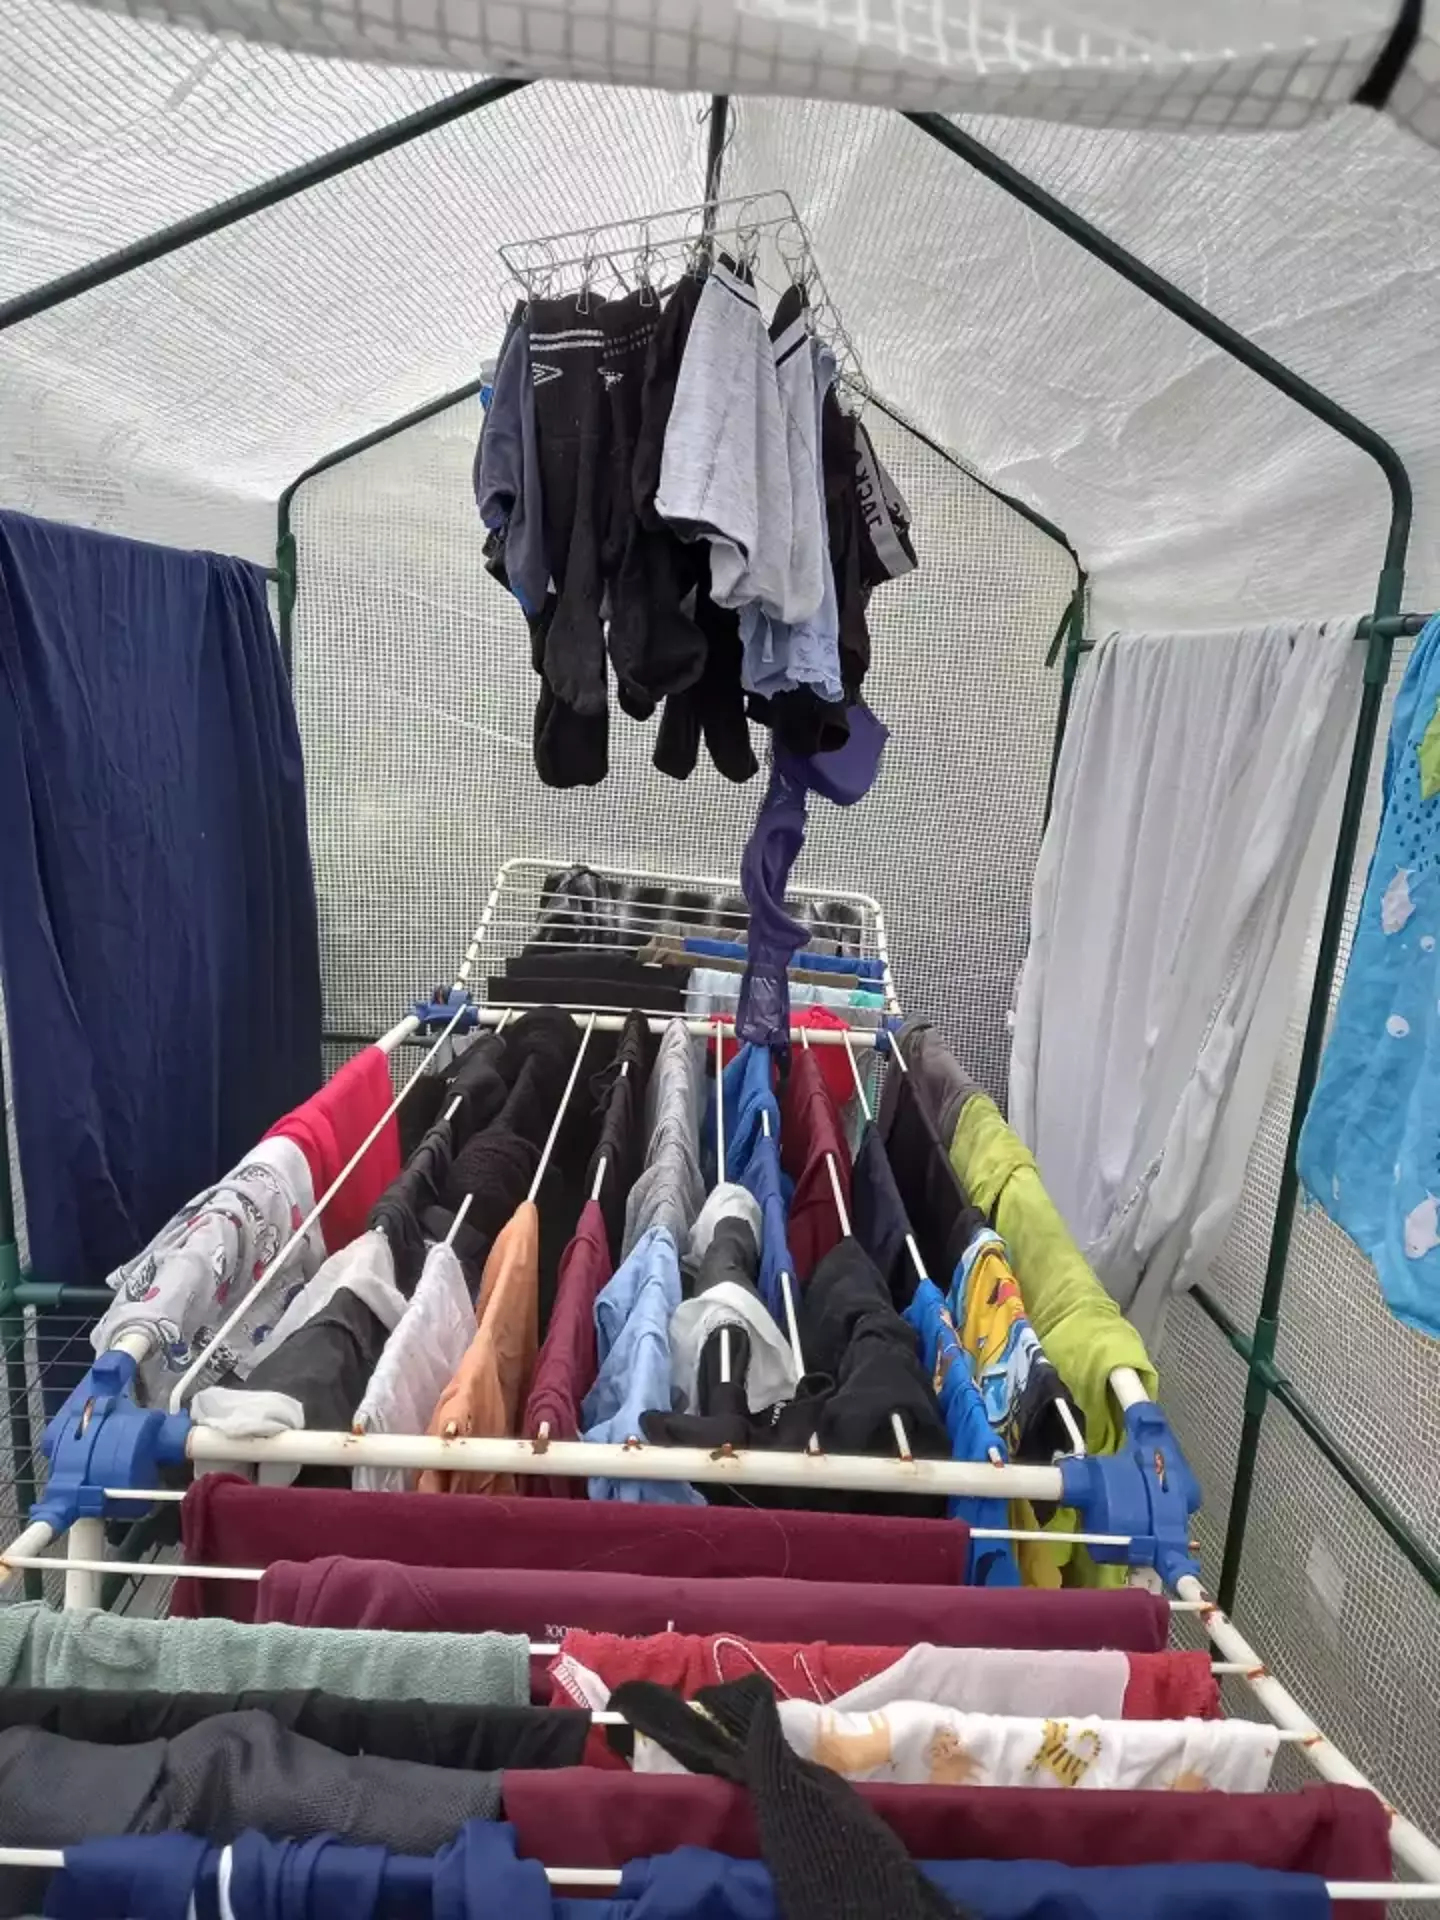 A mum has shared how she uses a plastic greenhouse to dry her family's washing.